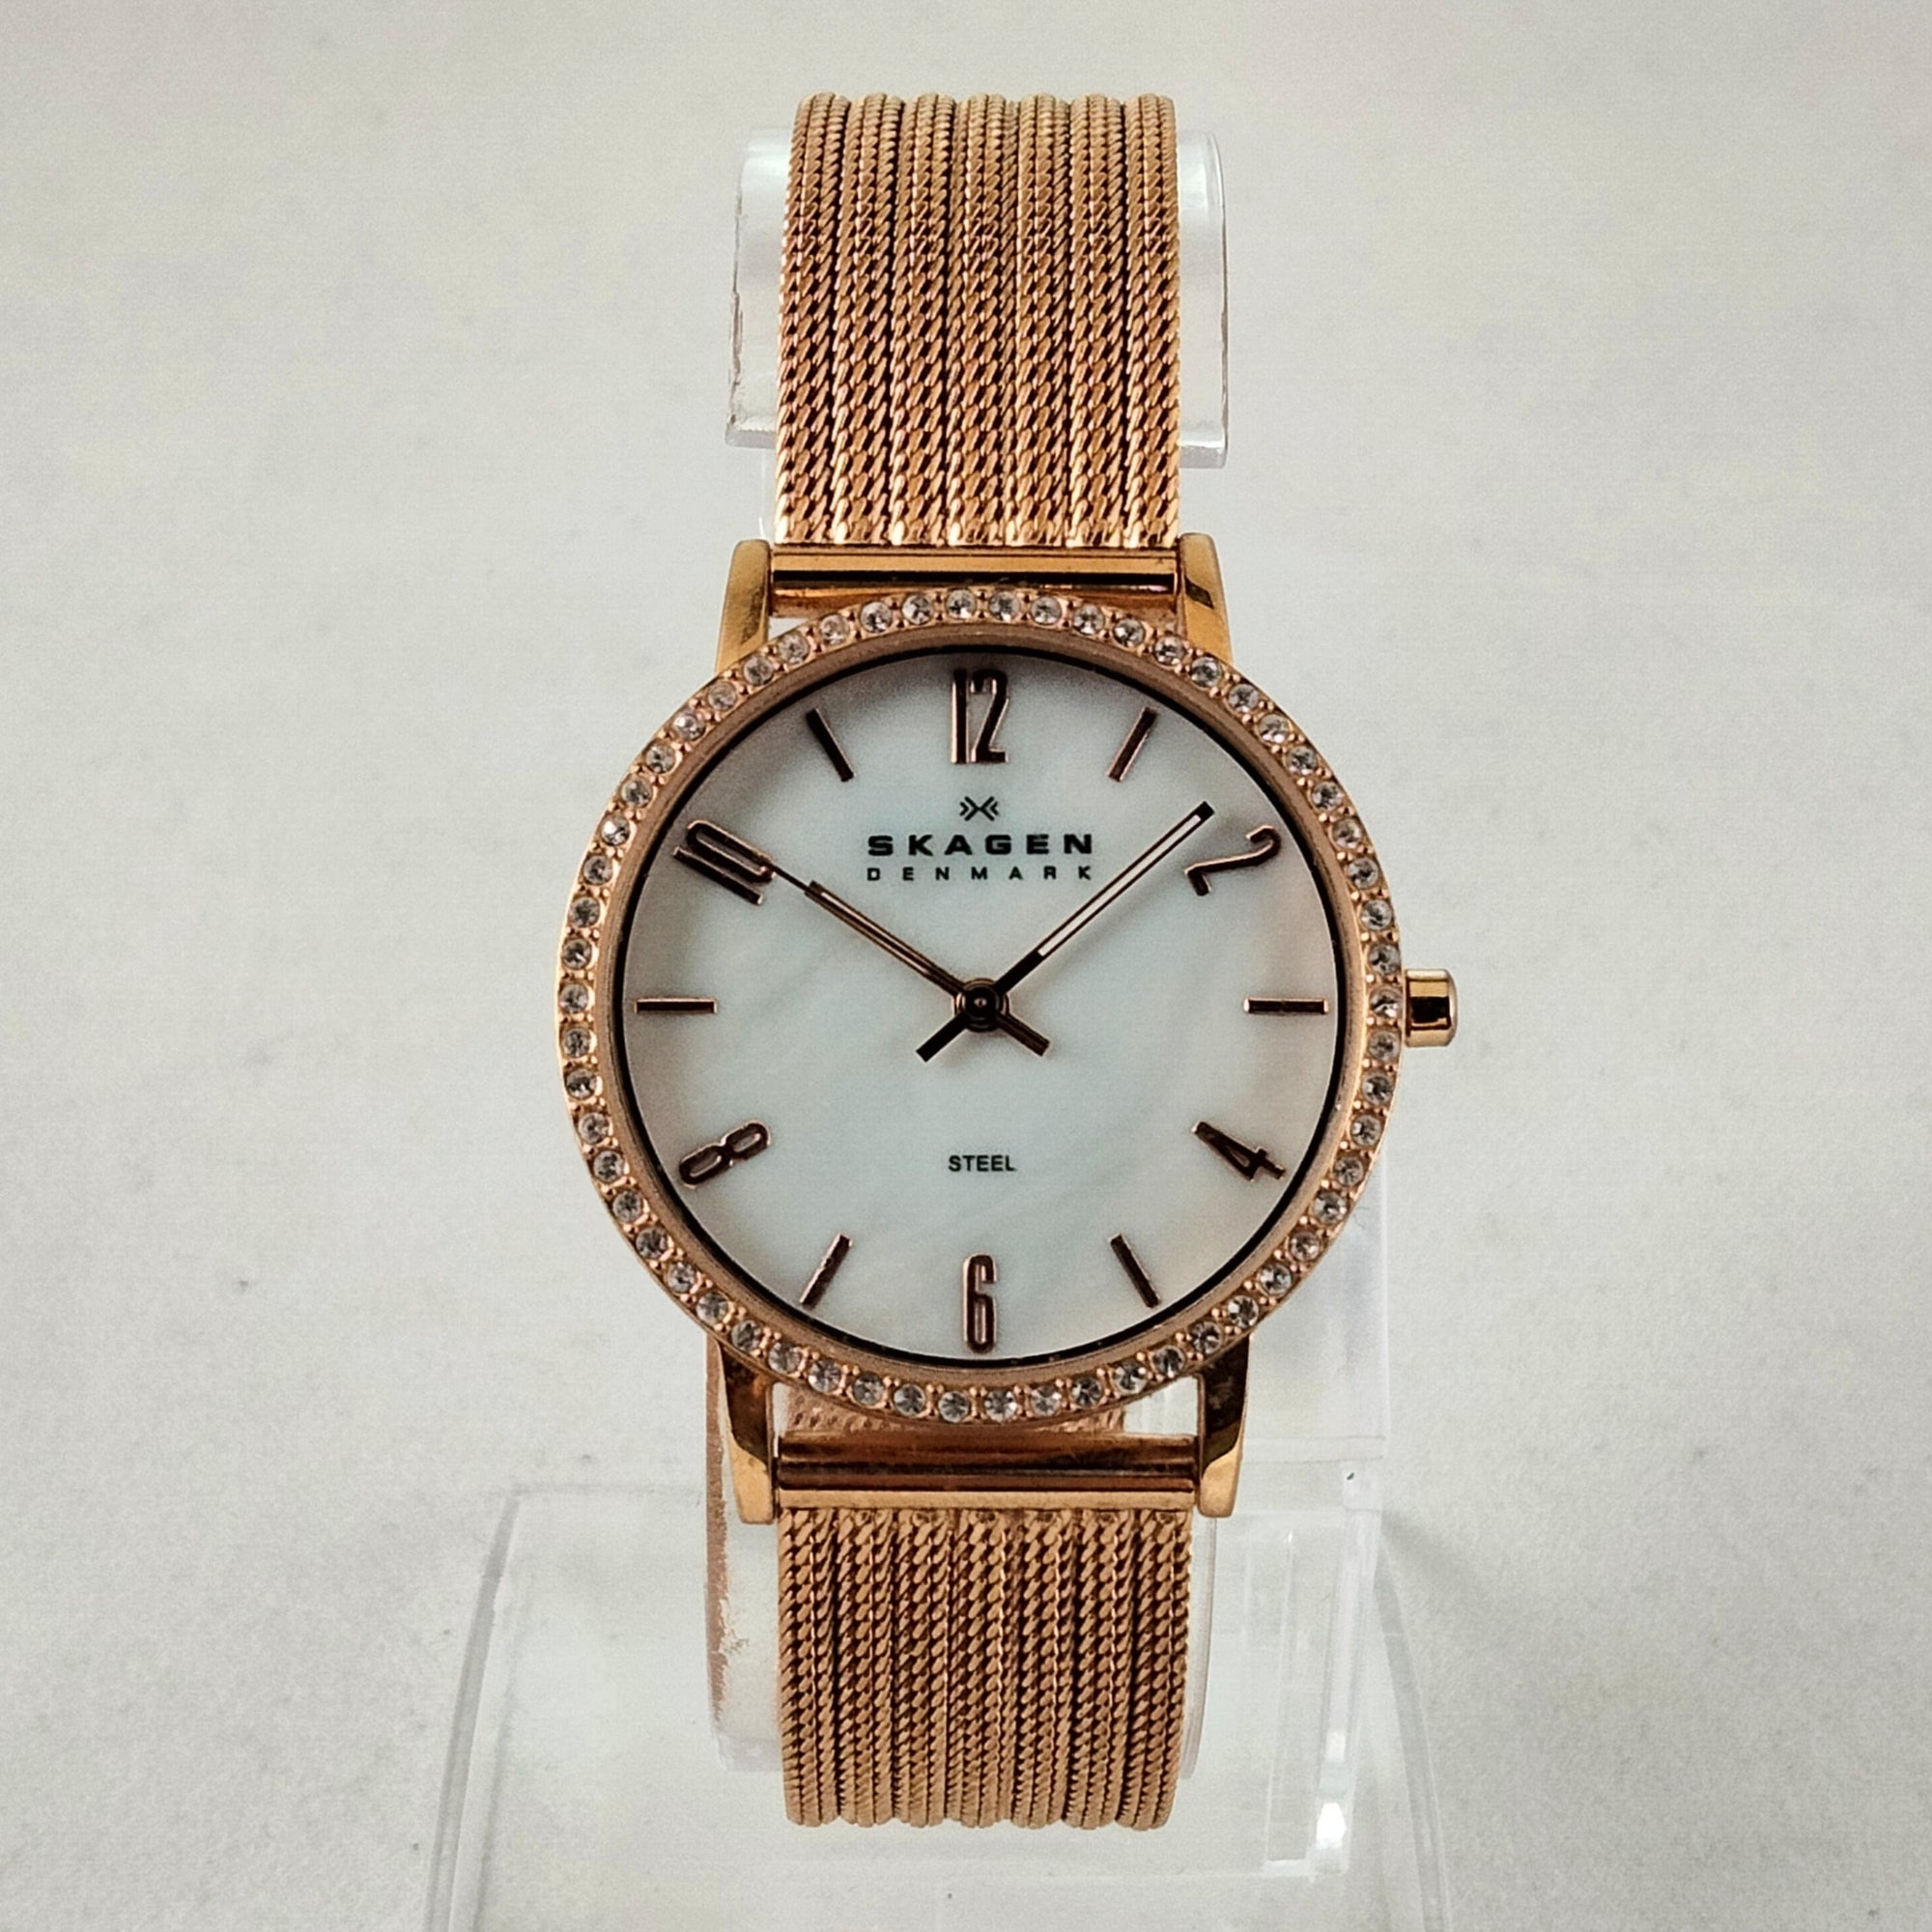 I Like Mikes Mid Century Modern Watches Skagen Women's Stainless Steel Gold Tone Watch, White Mother of Pearl Dial, Jewel Details, Gold Tone Mesh Strap